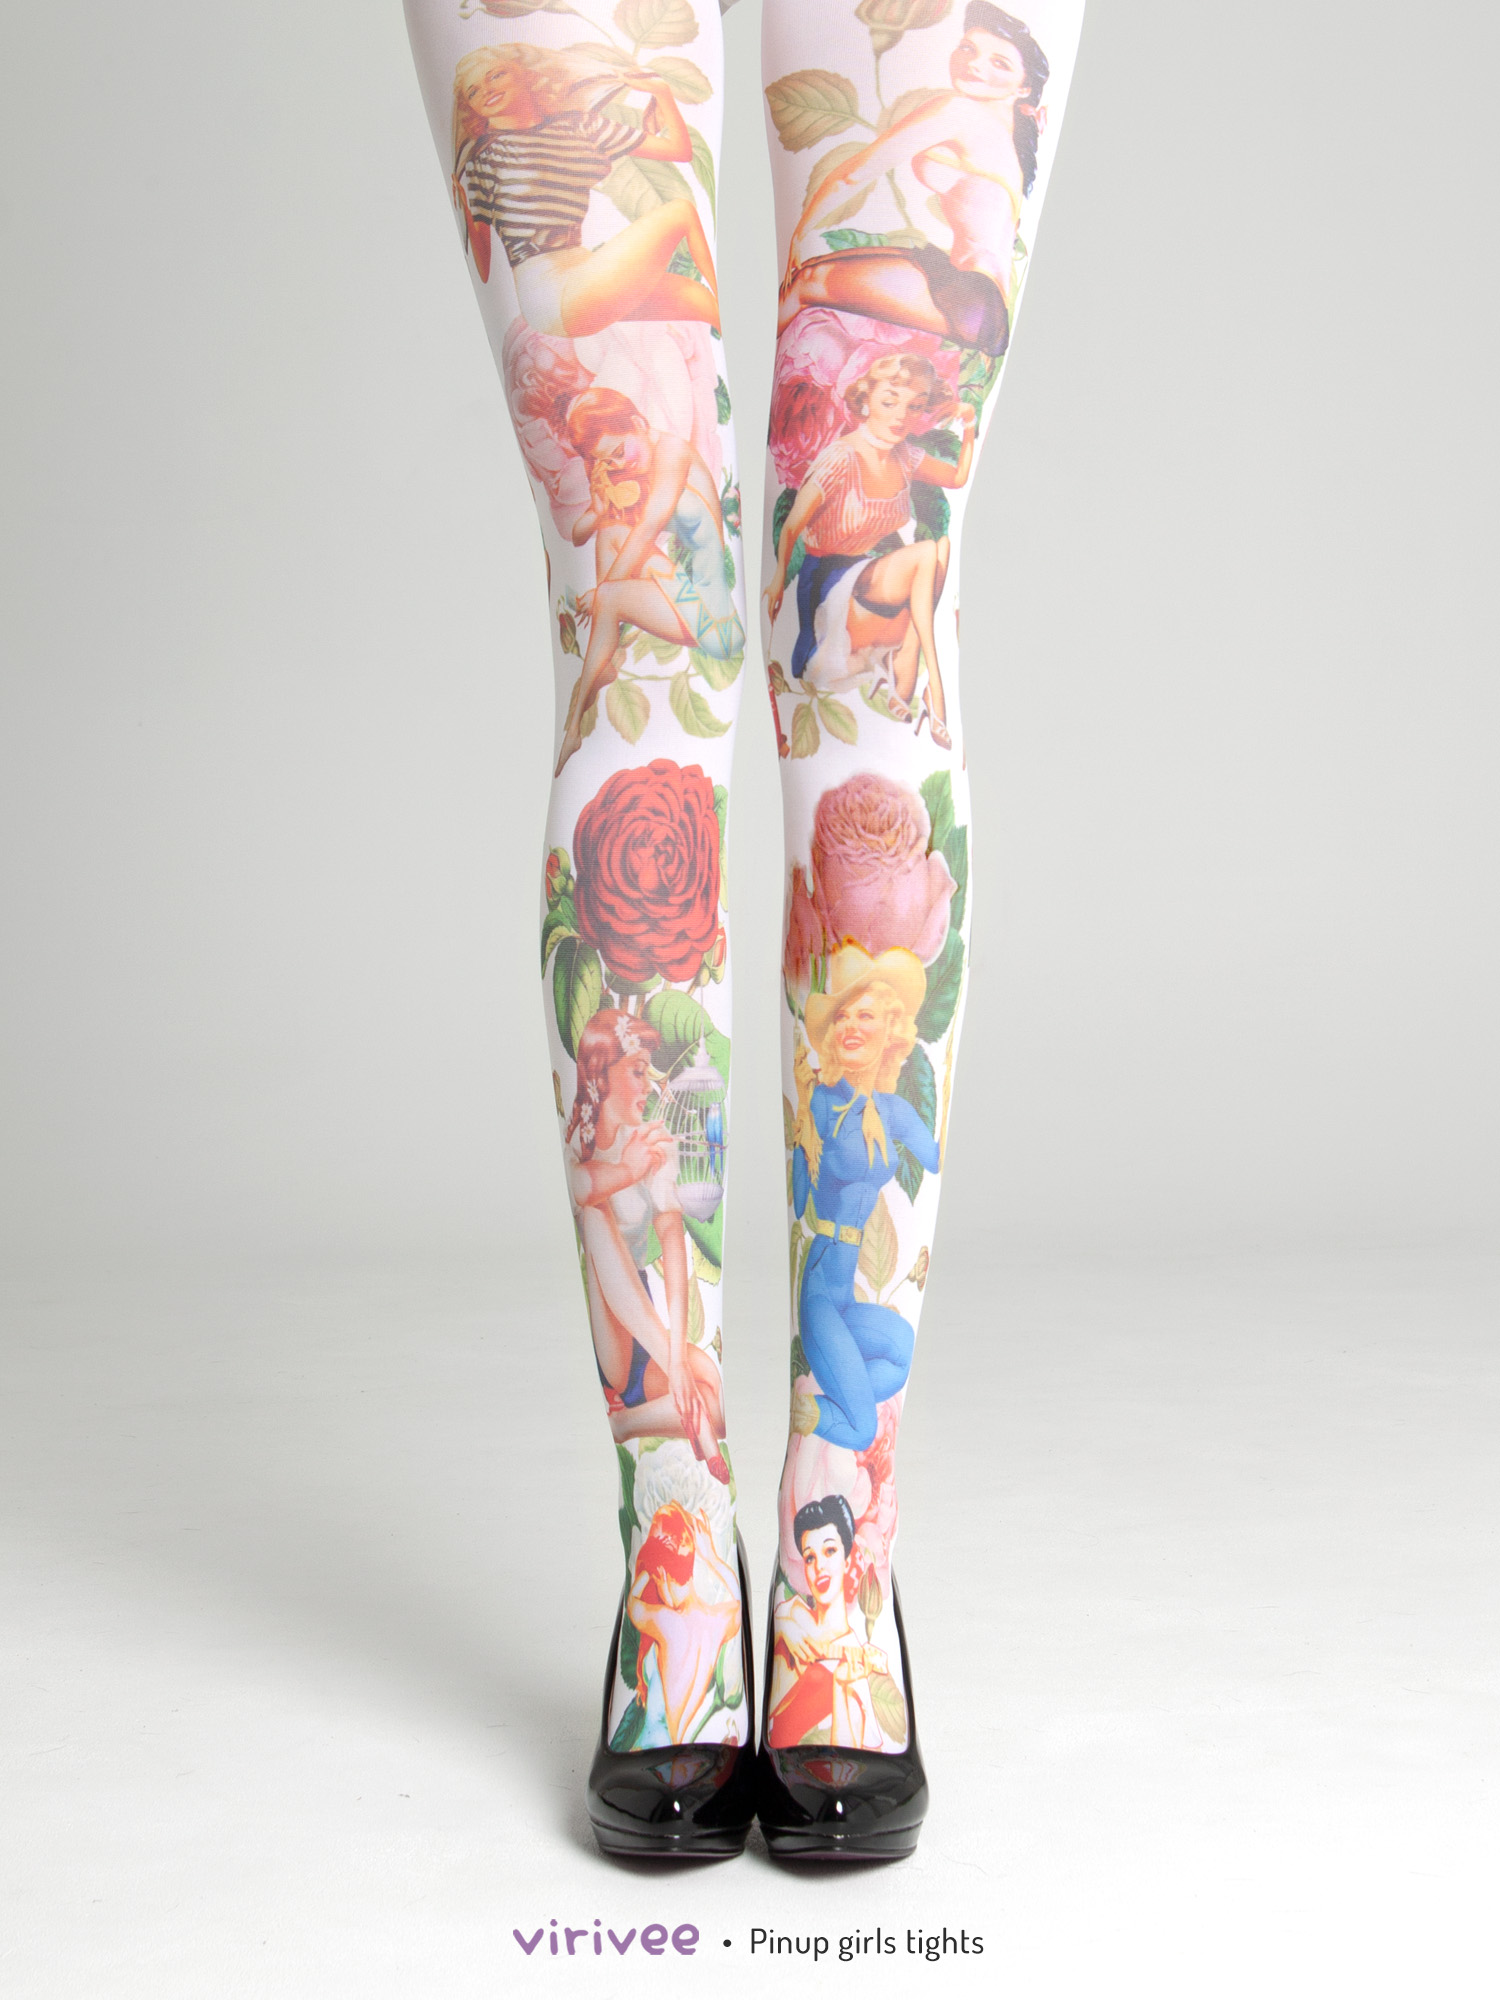 Pinup girls tights in S-4XL sizes